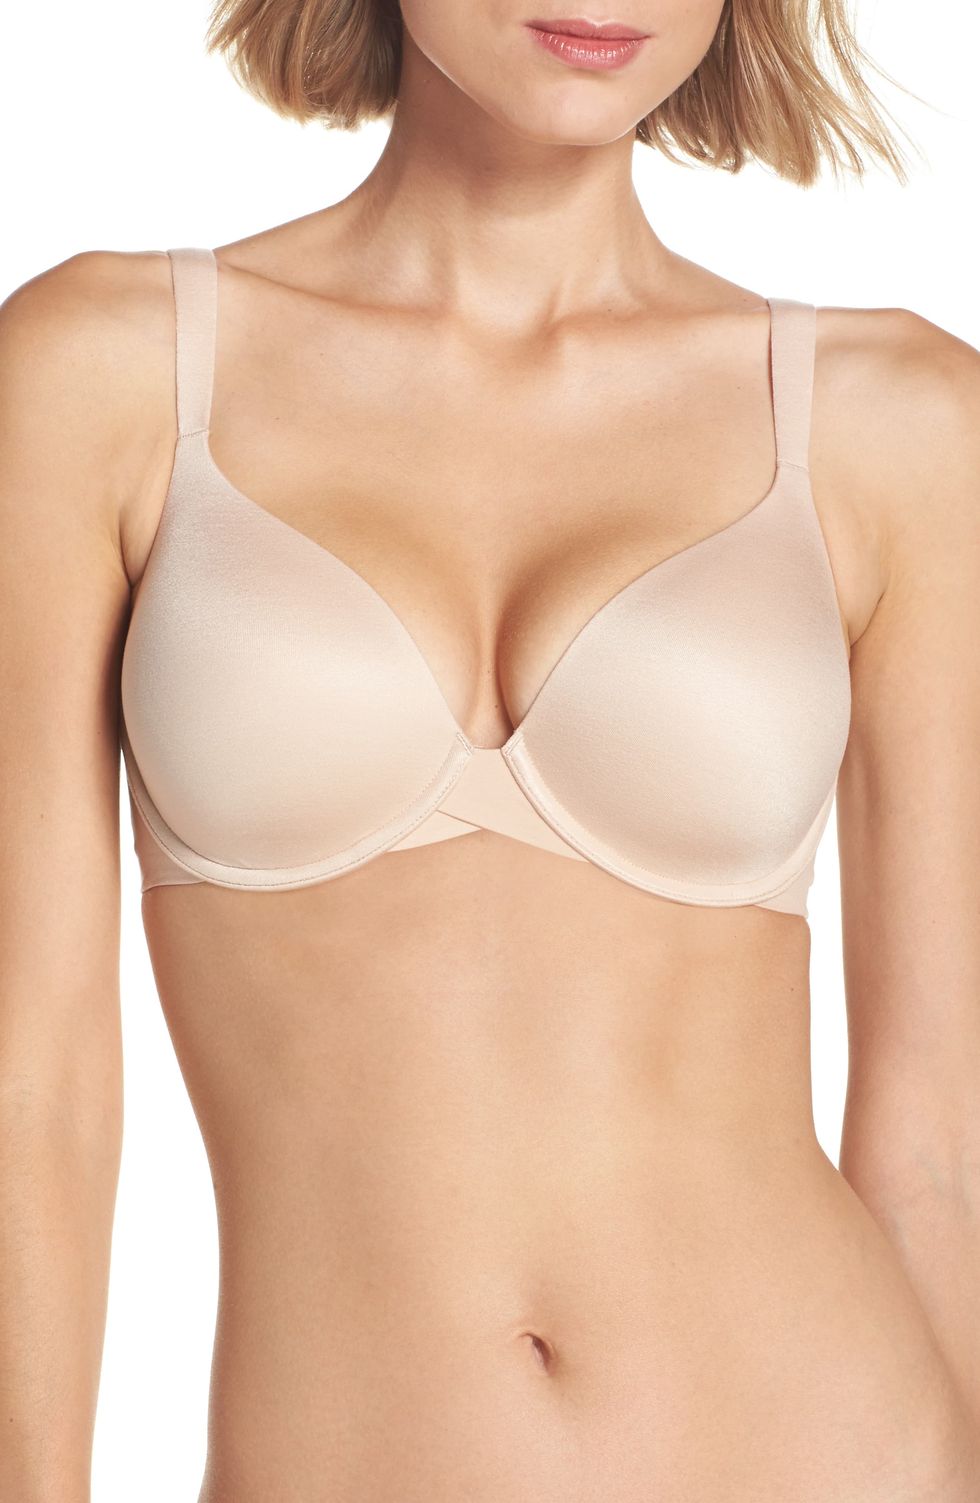 10 Types of Bras Every Woman Should Own - different kinds of bras with names  and pictures #women'sfashiontipsandstyl…